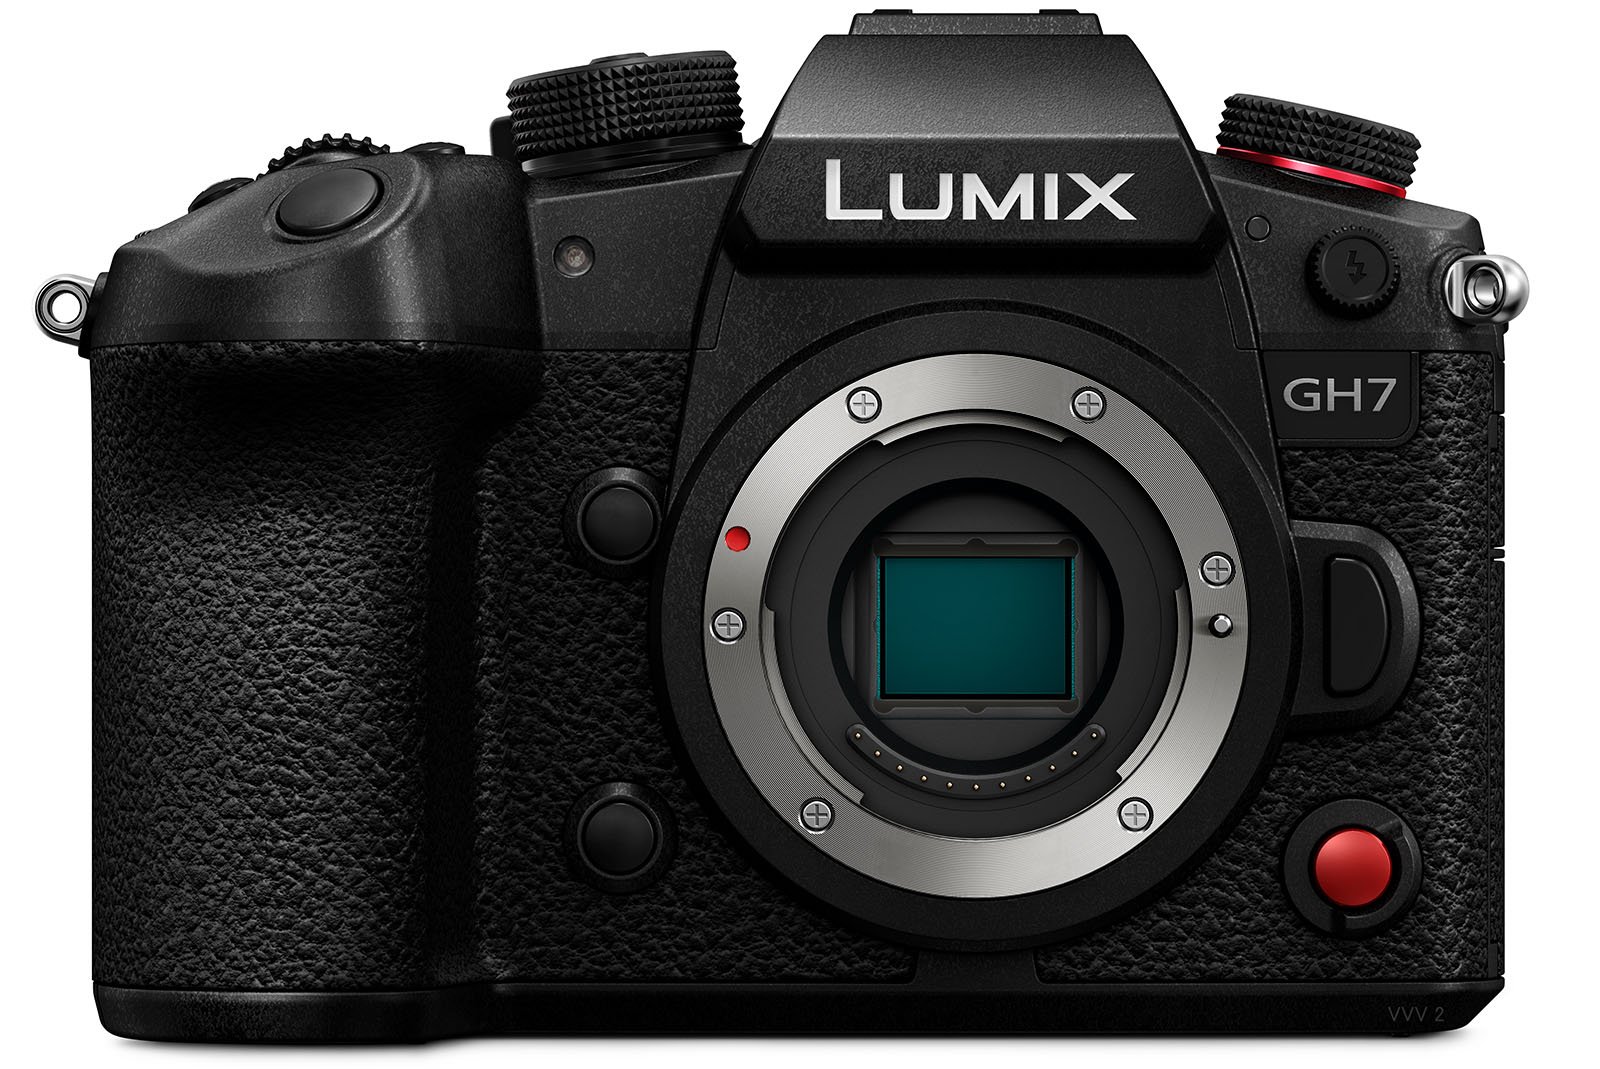 A black Panasonic LUMIX GH7 digital camera with various buttons and dials. The lens is not attached, revealing the sensor inside the camera body. The model name 